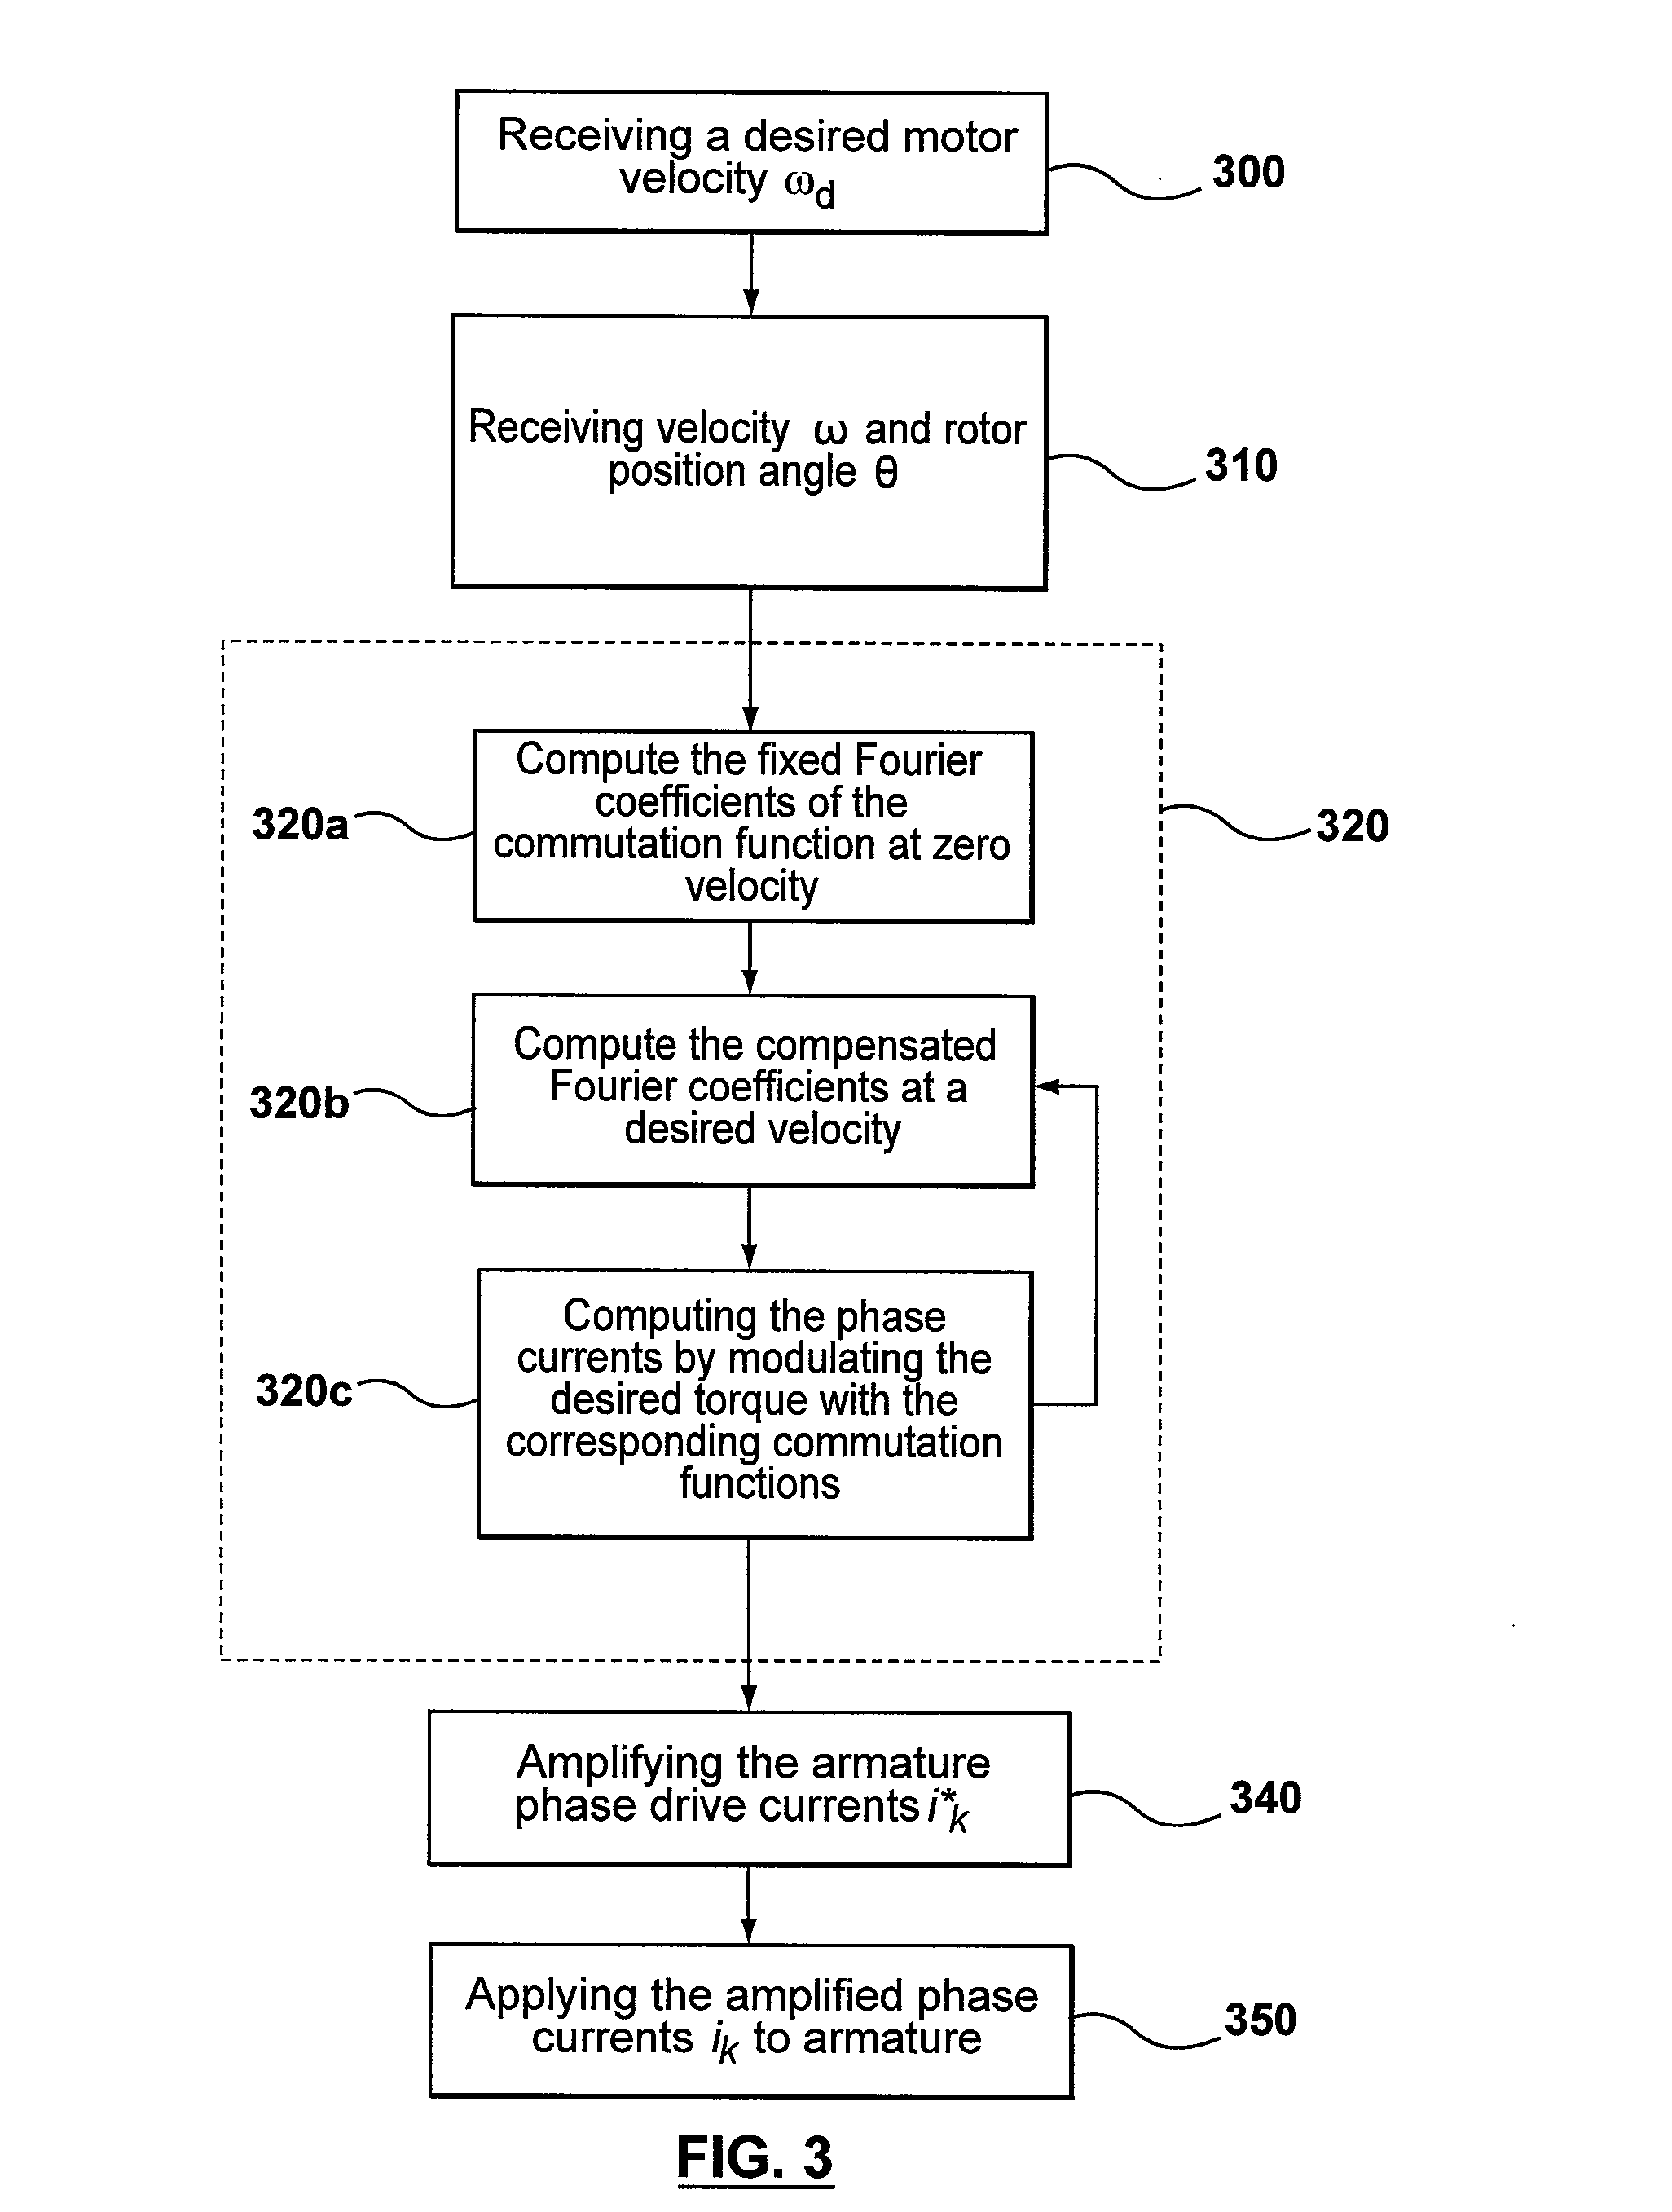 Method and apparatus for high velocity ripple suppression of brushless DC motors having limited drive/amplifier bandwidth